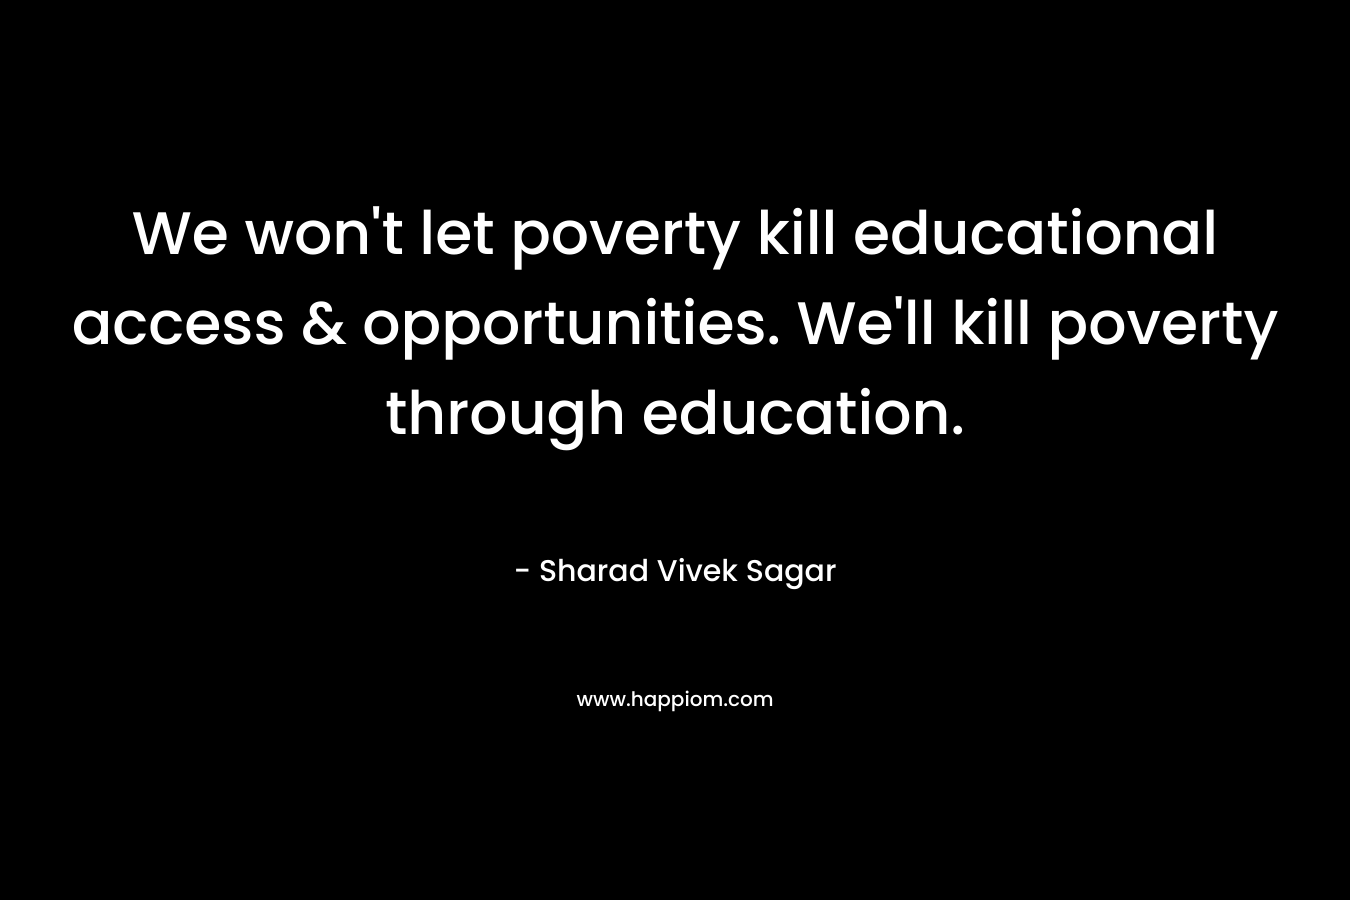 We won't let poverty kill educational access & opportunities. We'll kill poverty through education.